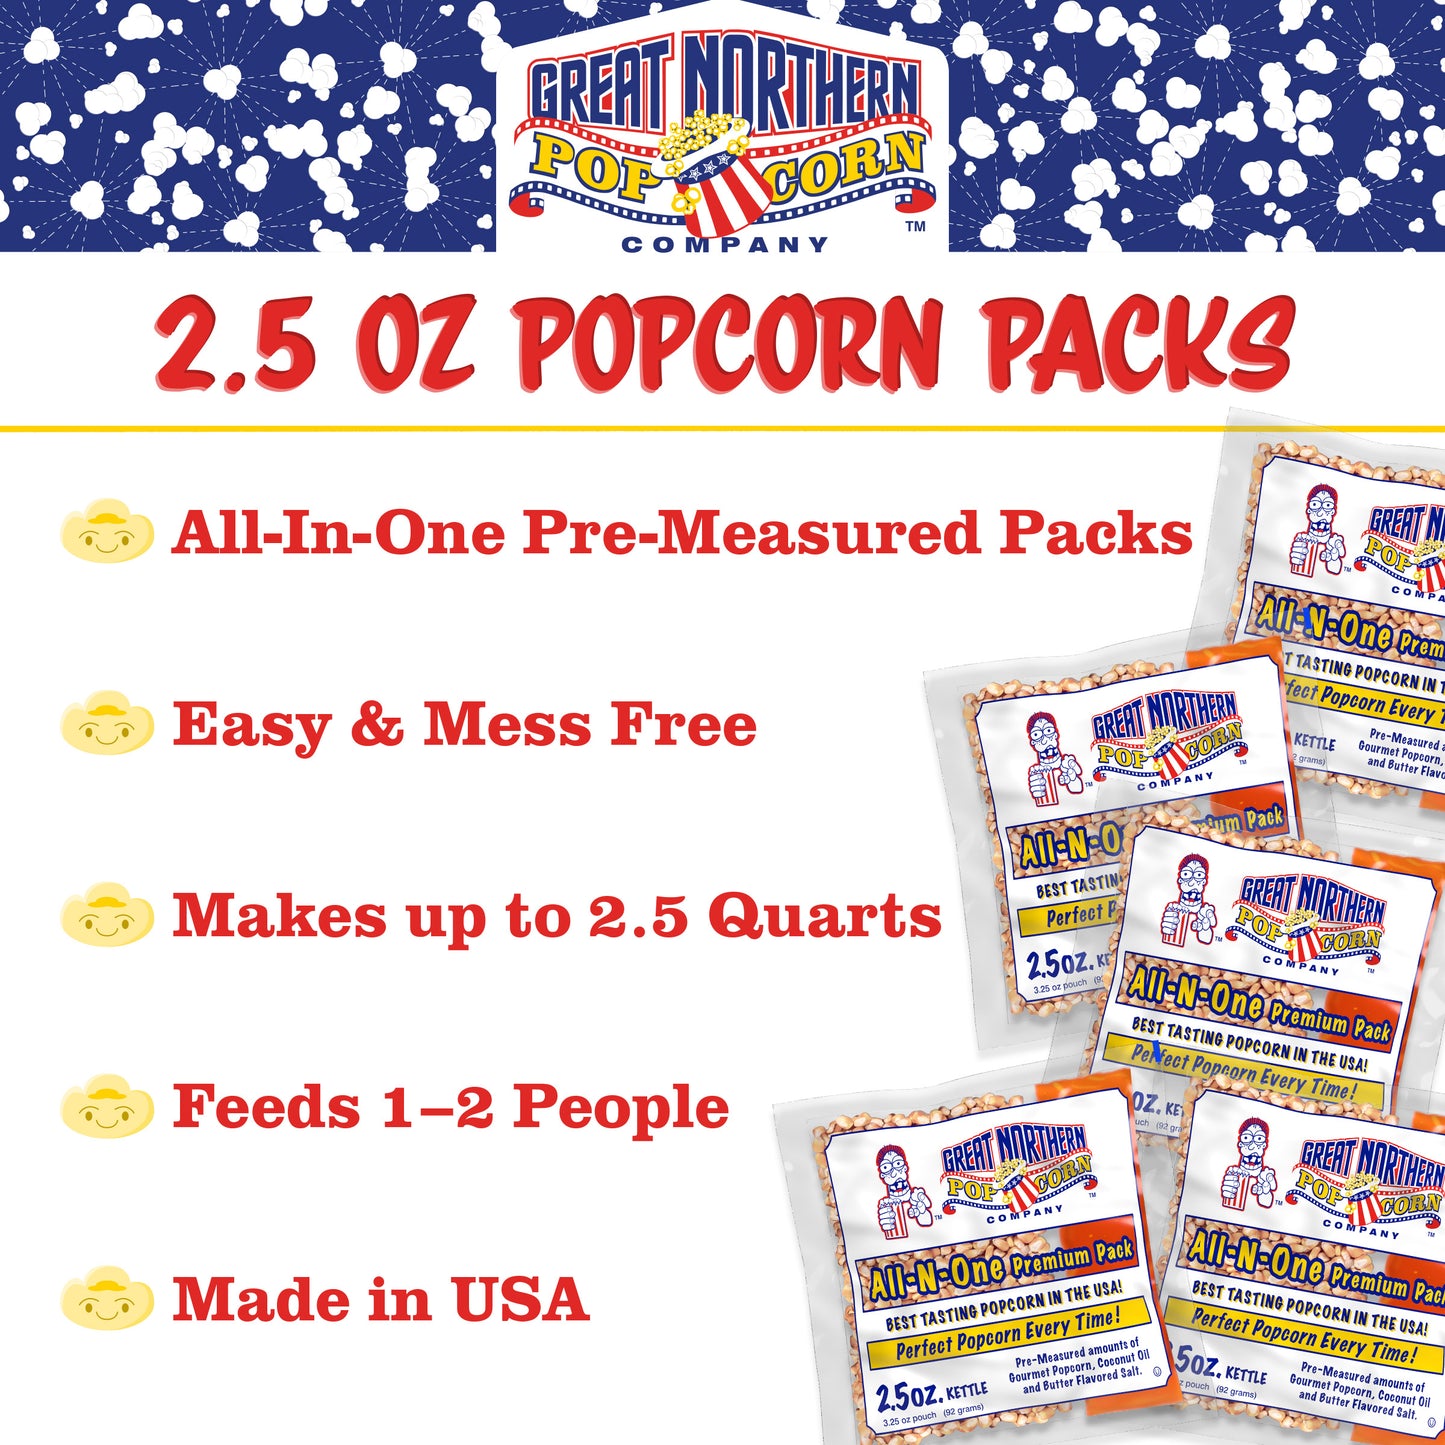 100 Popcorn Bags and 2.5 Ounce All-in-One Popcorn Packs  – Case of 24